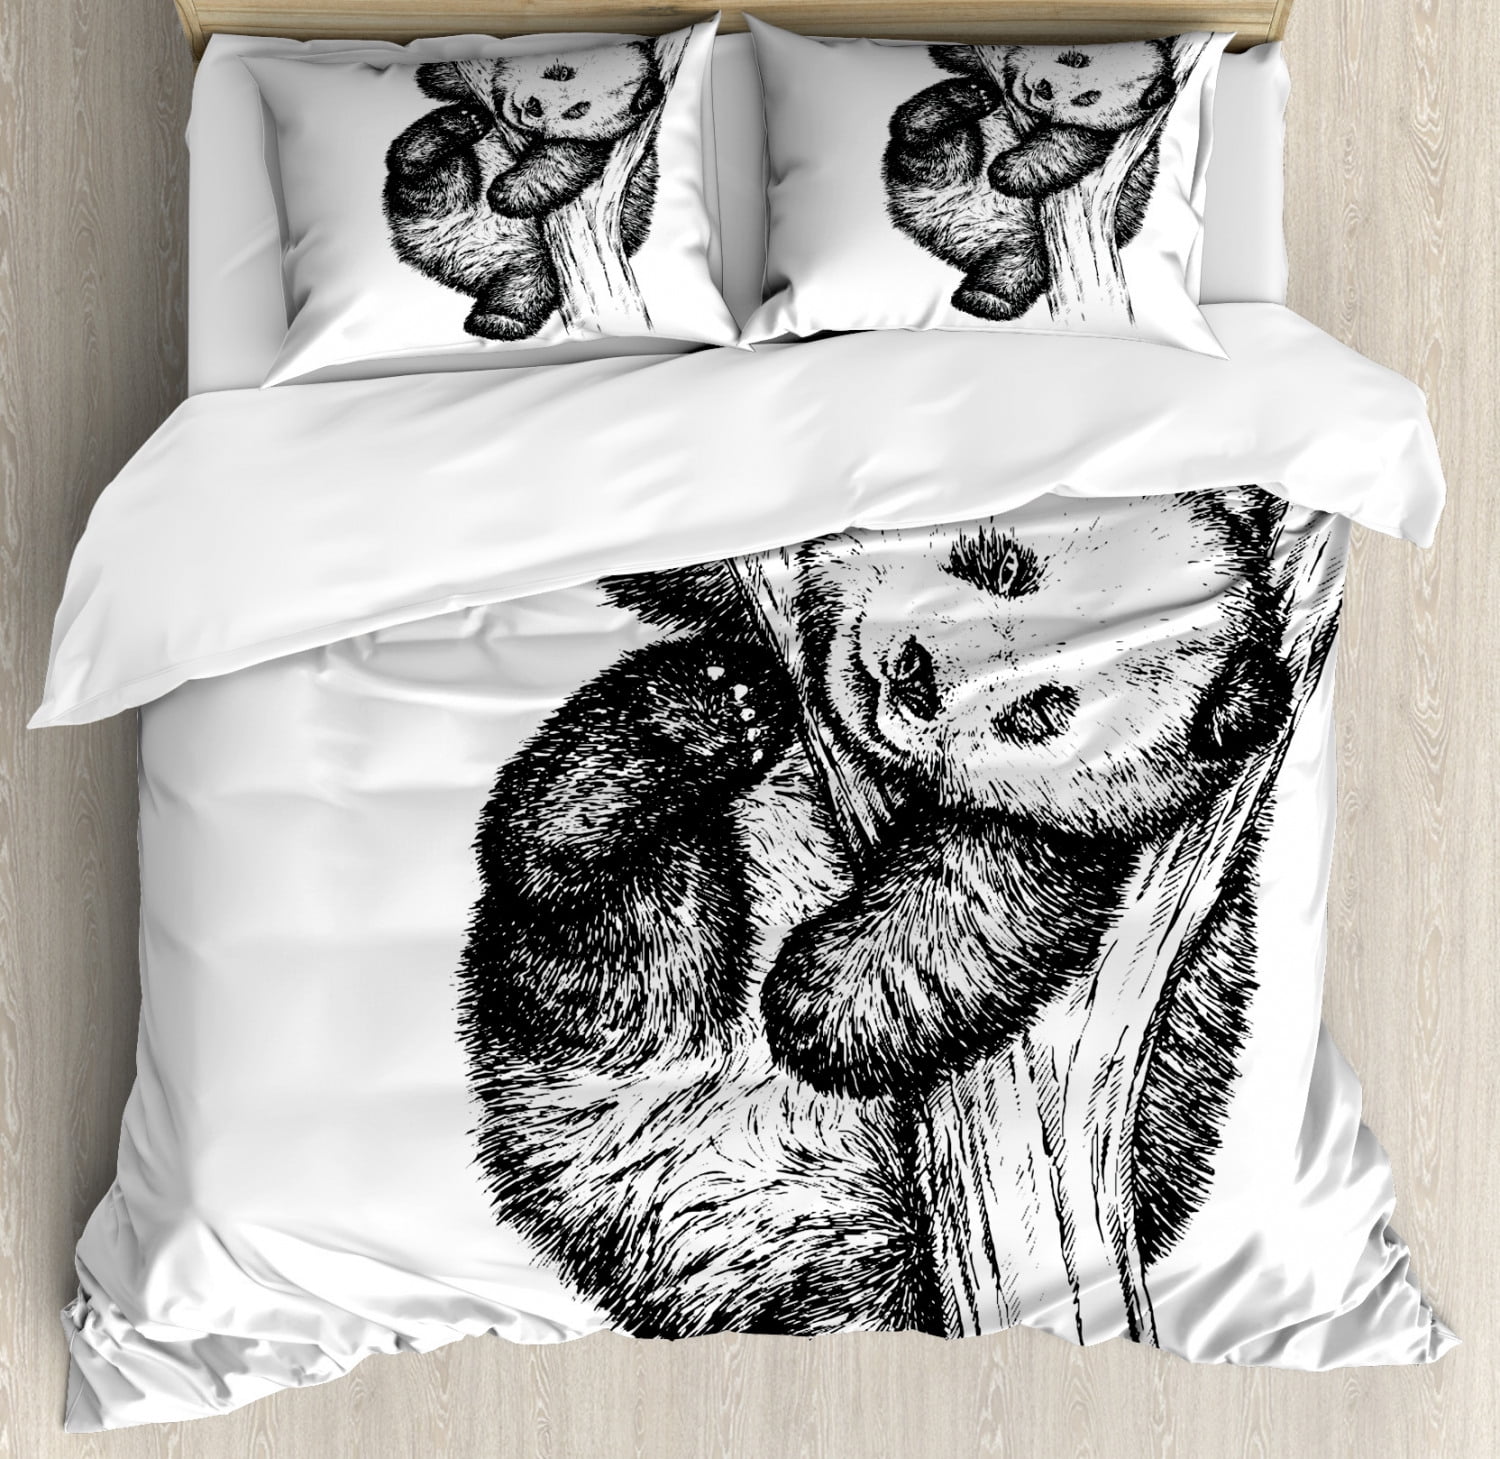 Set of 2 100% Cotton Black and White Plaid Printed Pattern Pillow Case Cover for Bed Pillow Protector Bubble bear Pillowcase Queen Size Set